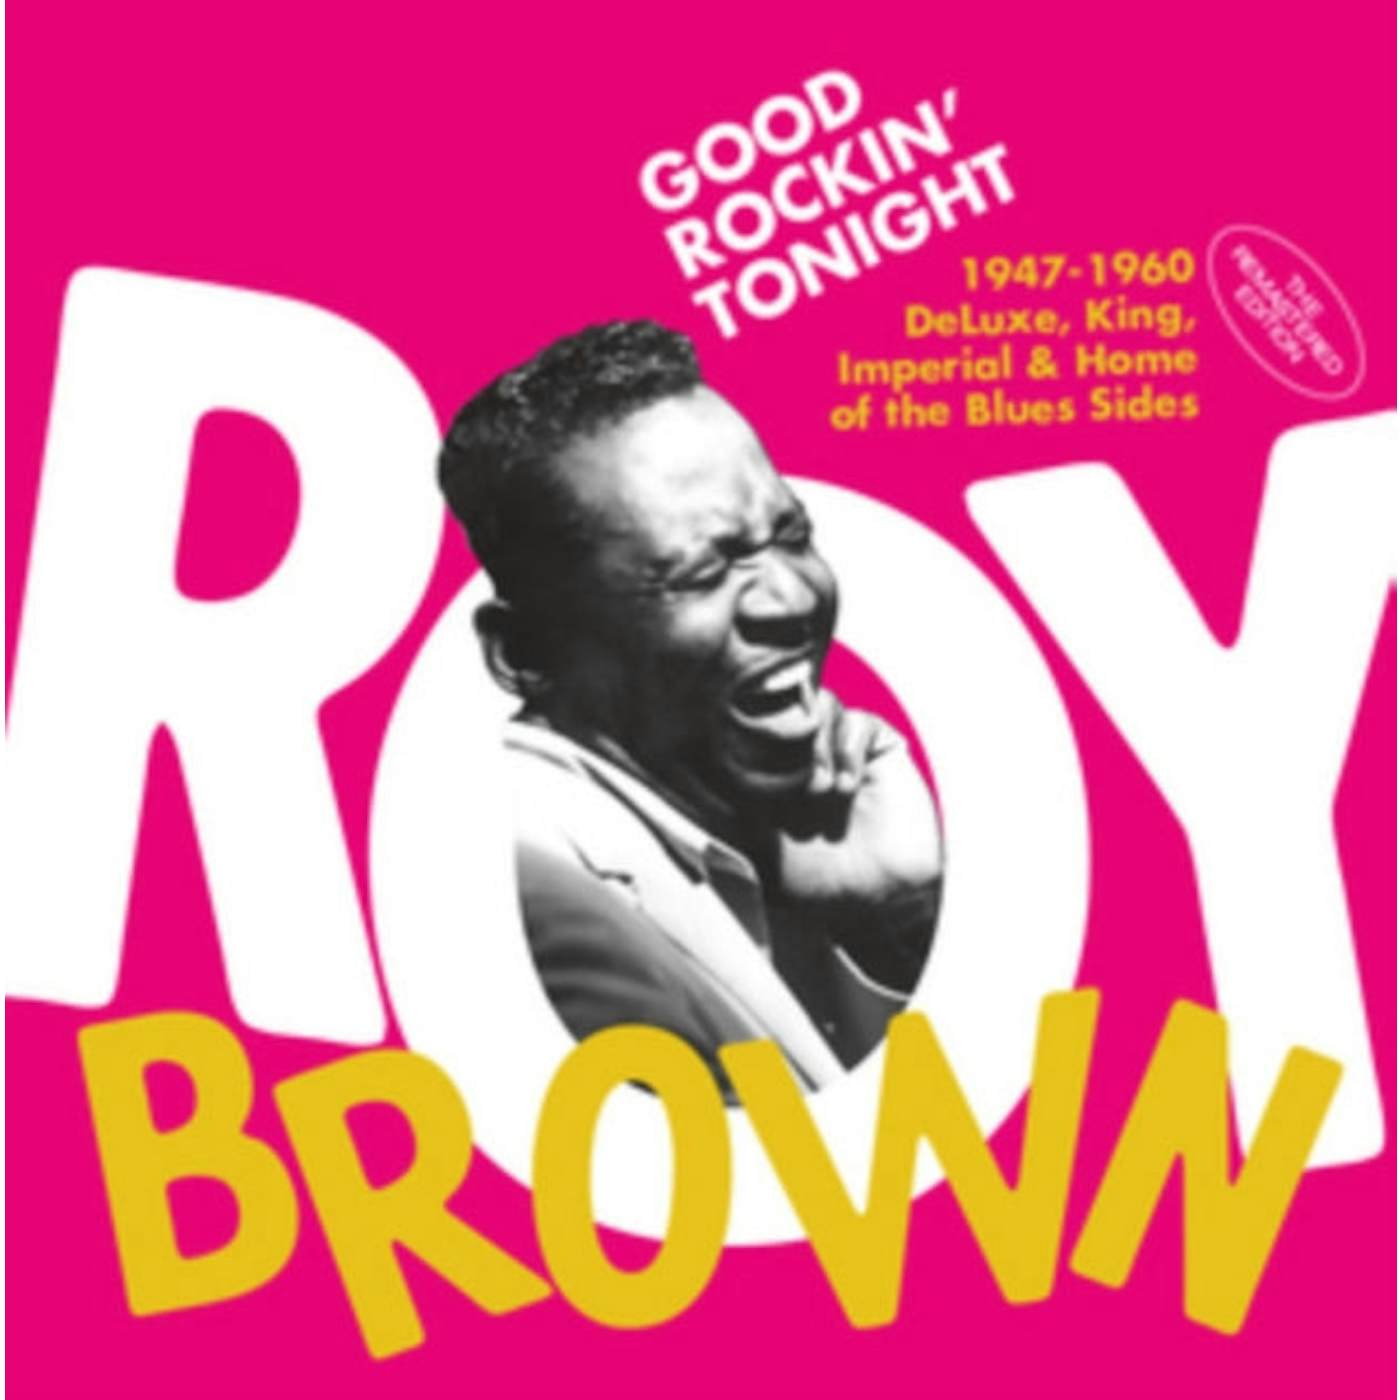 Roy Brown CD - Good Rockin' Tonight - The 1947-1960 Deluxe. King. Imperial & Home Of The Blues Sides